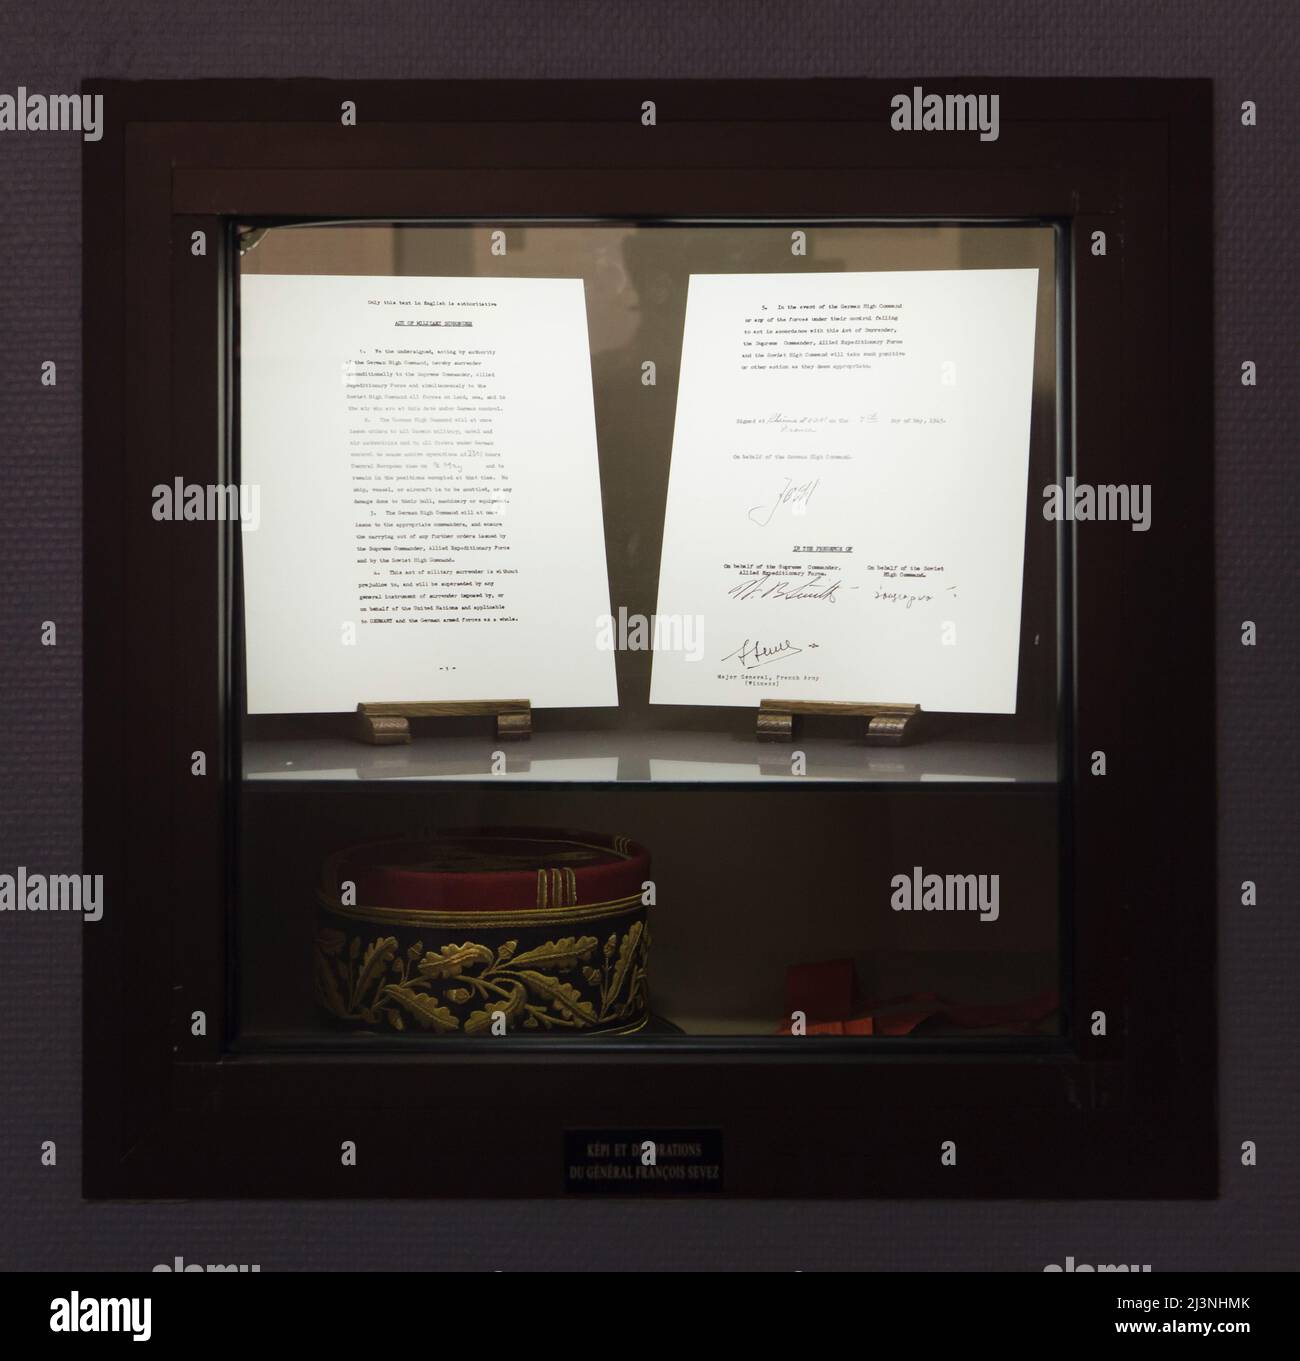 Facsimile of the German Instrument of Surrender signed in Reims on 7 May 1945 and the kepi of French general François Sevez on display in the Museum of the Surrender (Musée de la Reddition) in Reims, France. The first German Instrument of Surrender that ended World War II in Europe was signed at 02:41 Central European Time (CET) on 7 May 1945 in the building which serves now as the museum. French general François Sevez was present at the German surrender in Reims, and signed the German Instrument of Surrender as the official witness. Stock Photo